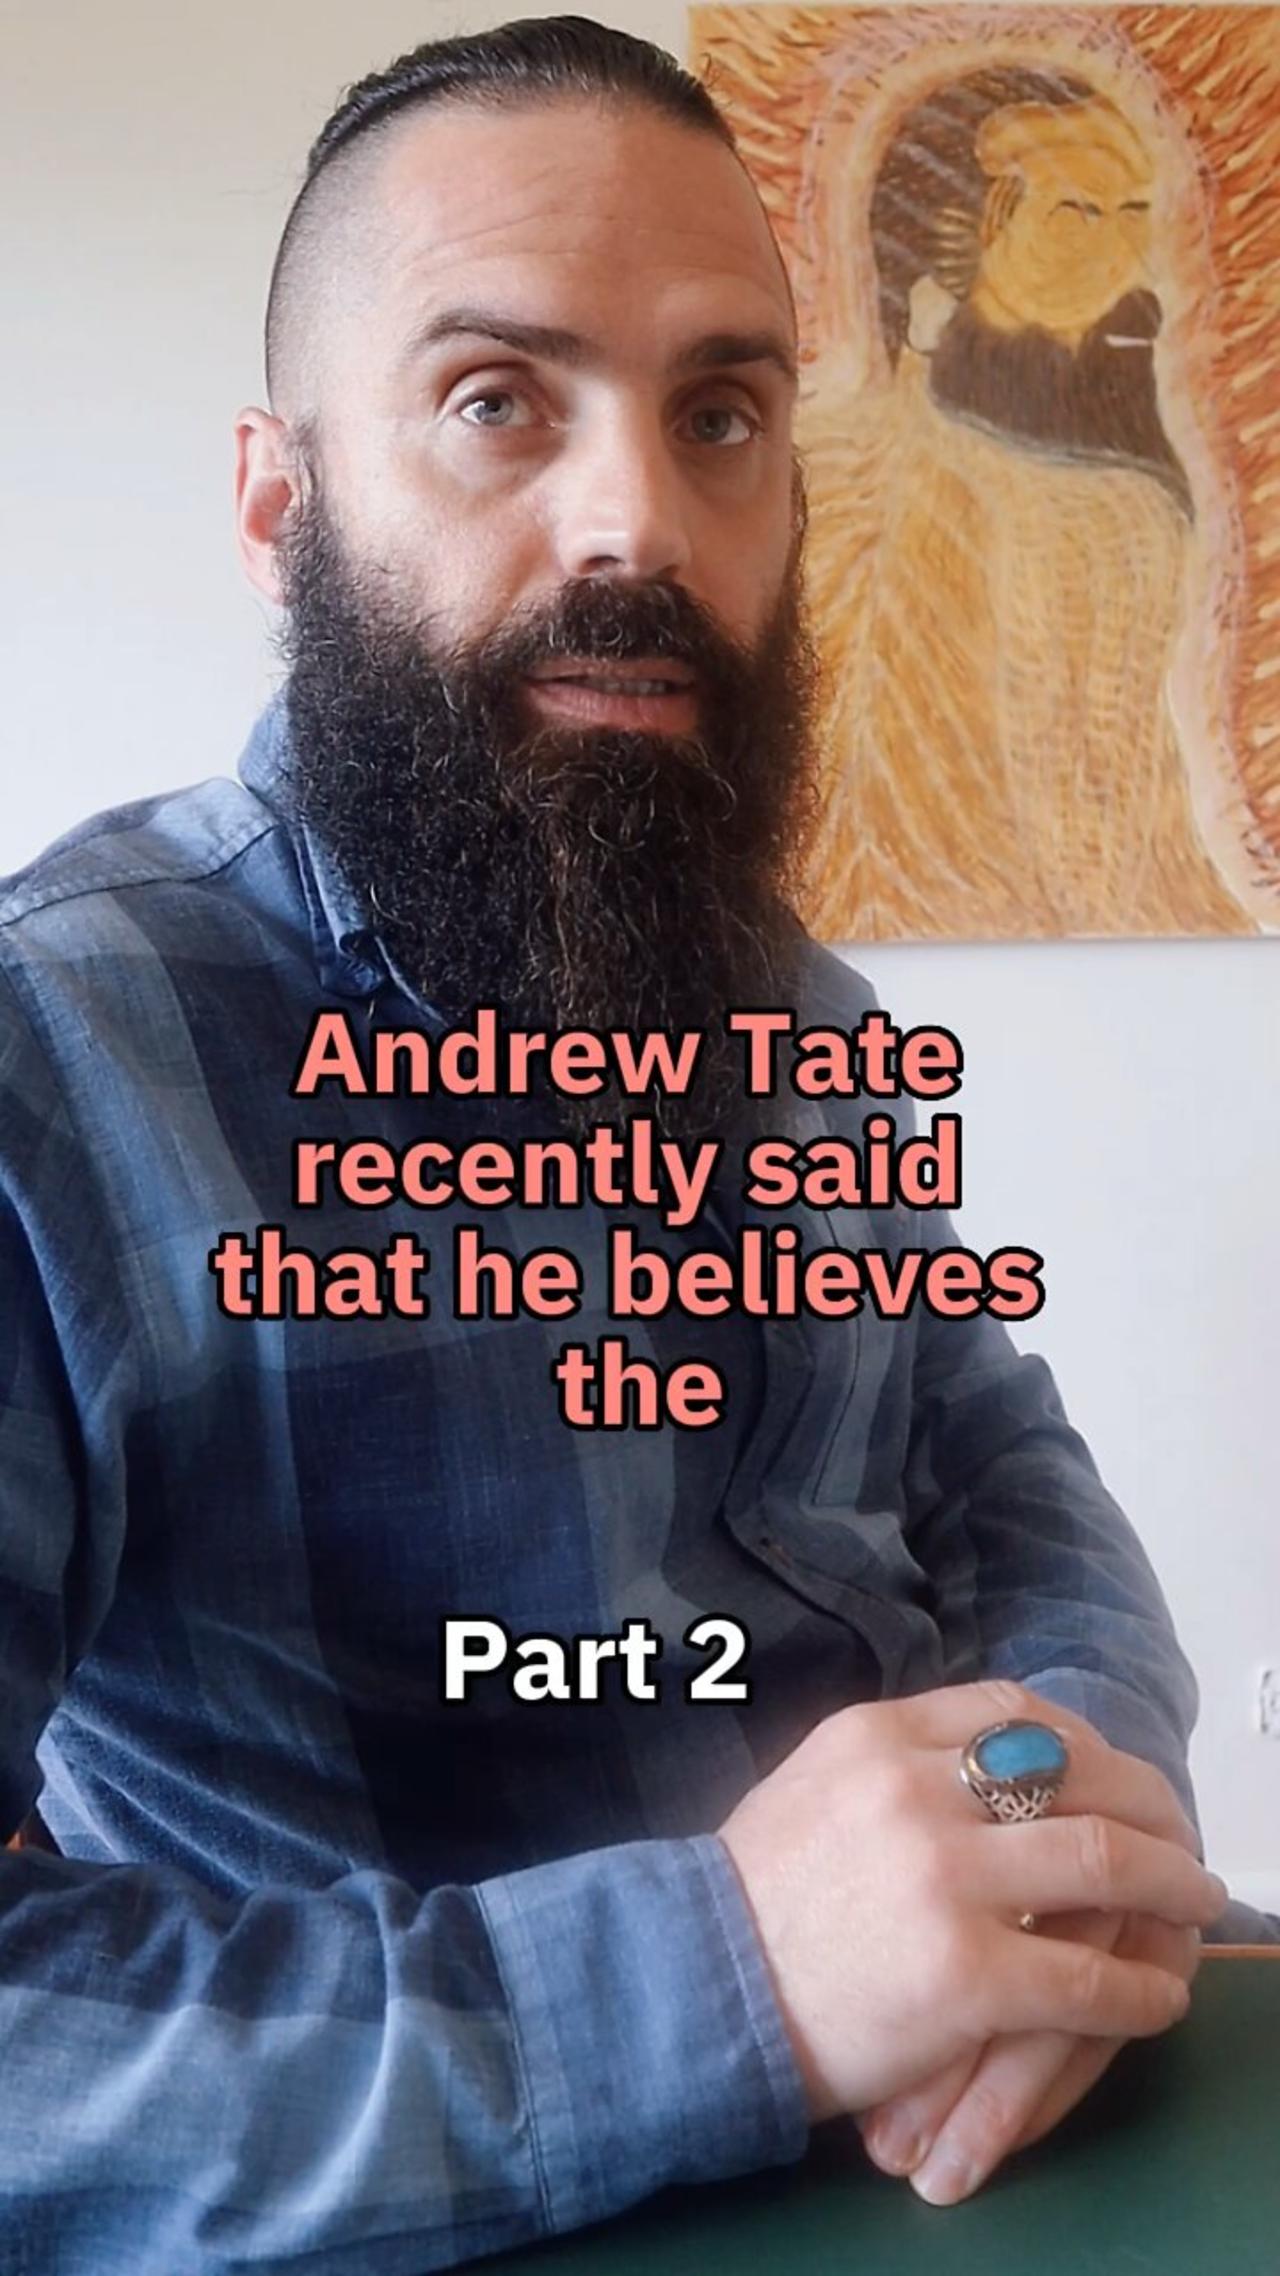 Andrew Tate Said The Elites Are Going To Kill Him - Part 2